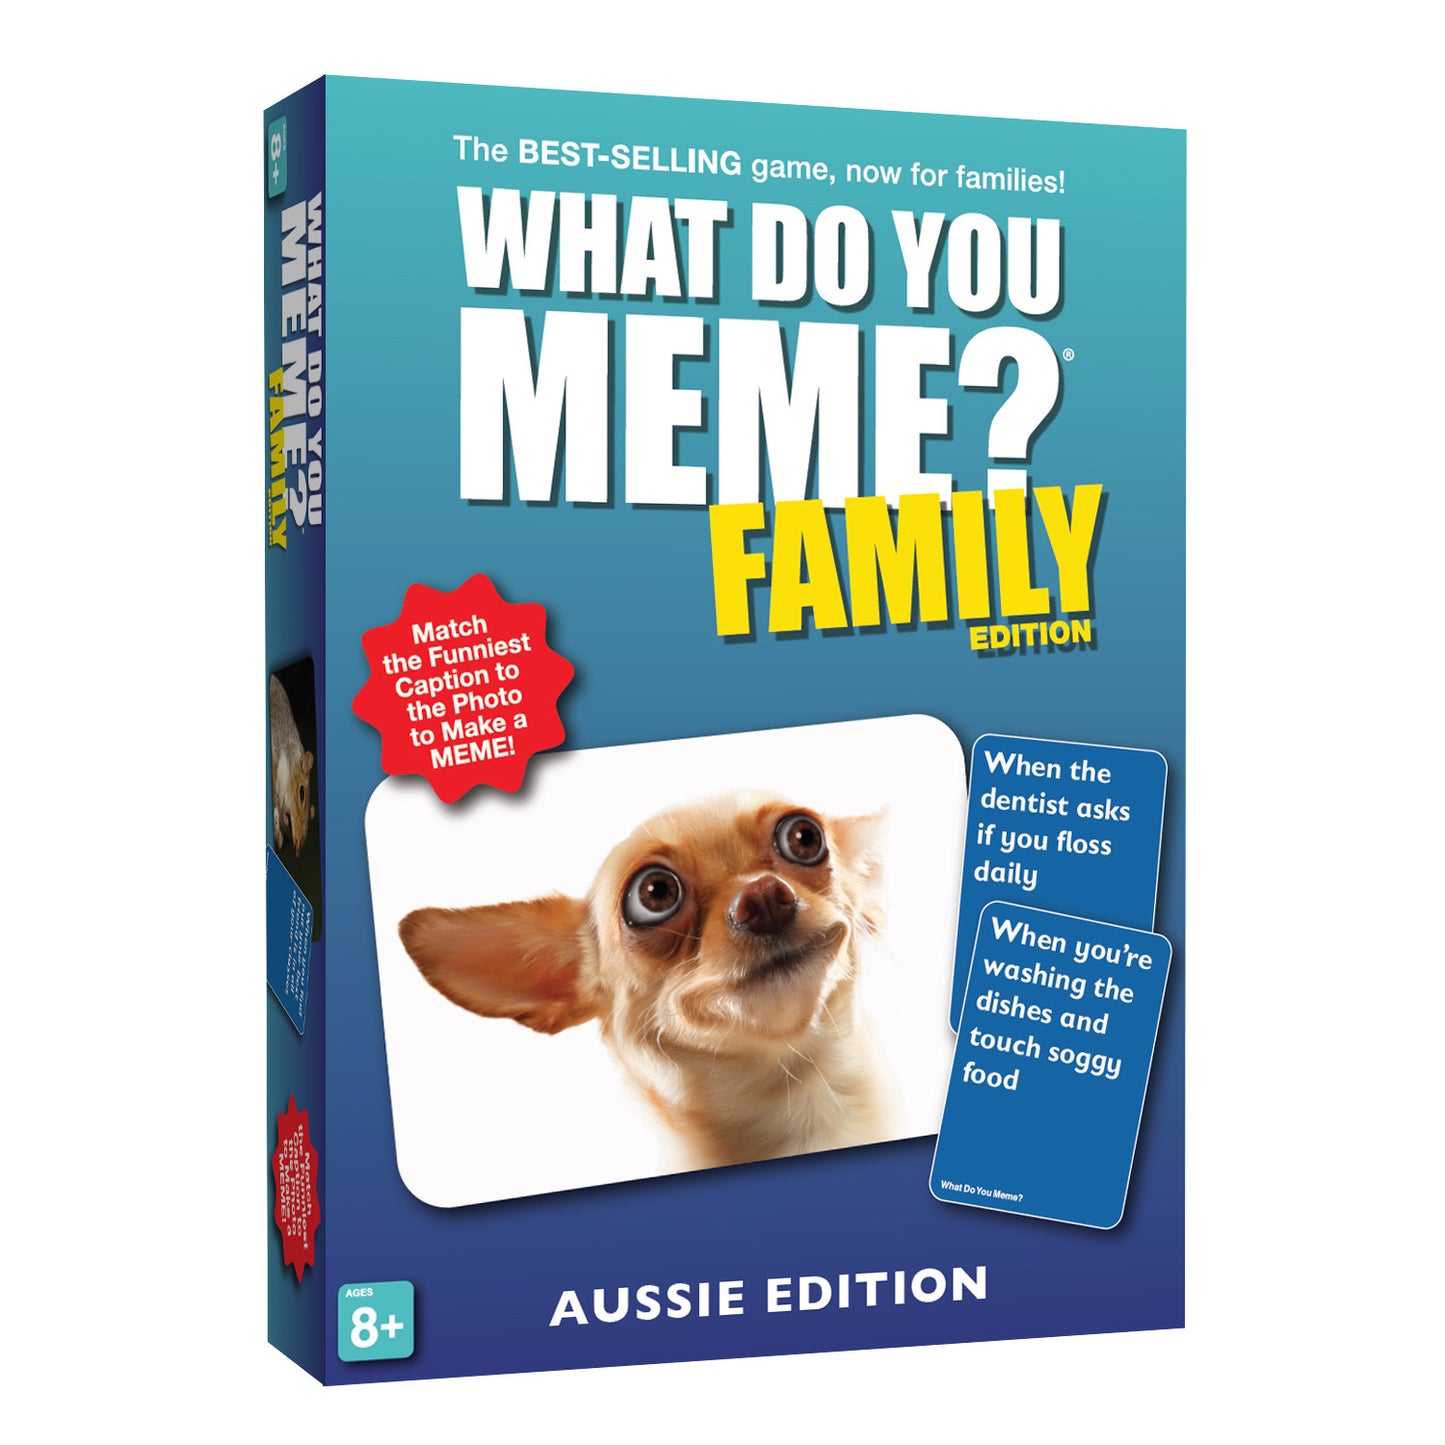 What Do You Meme? Family Aussie Edition